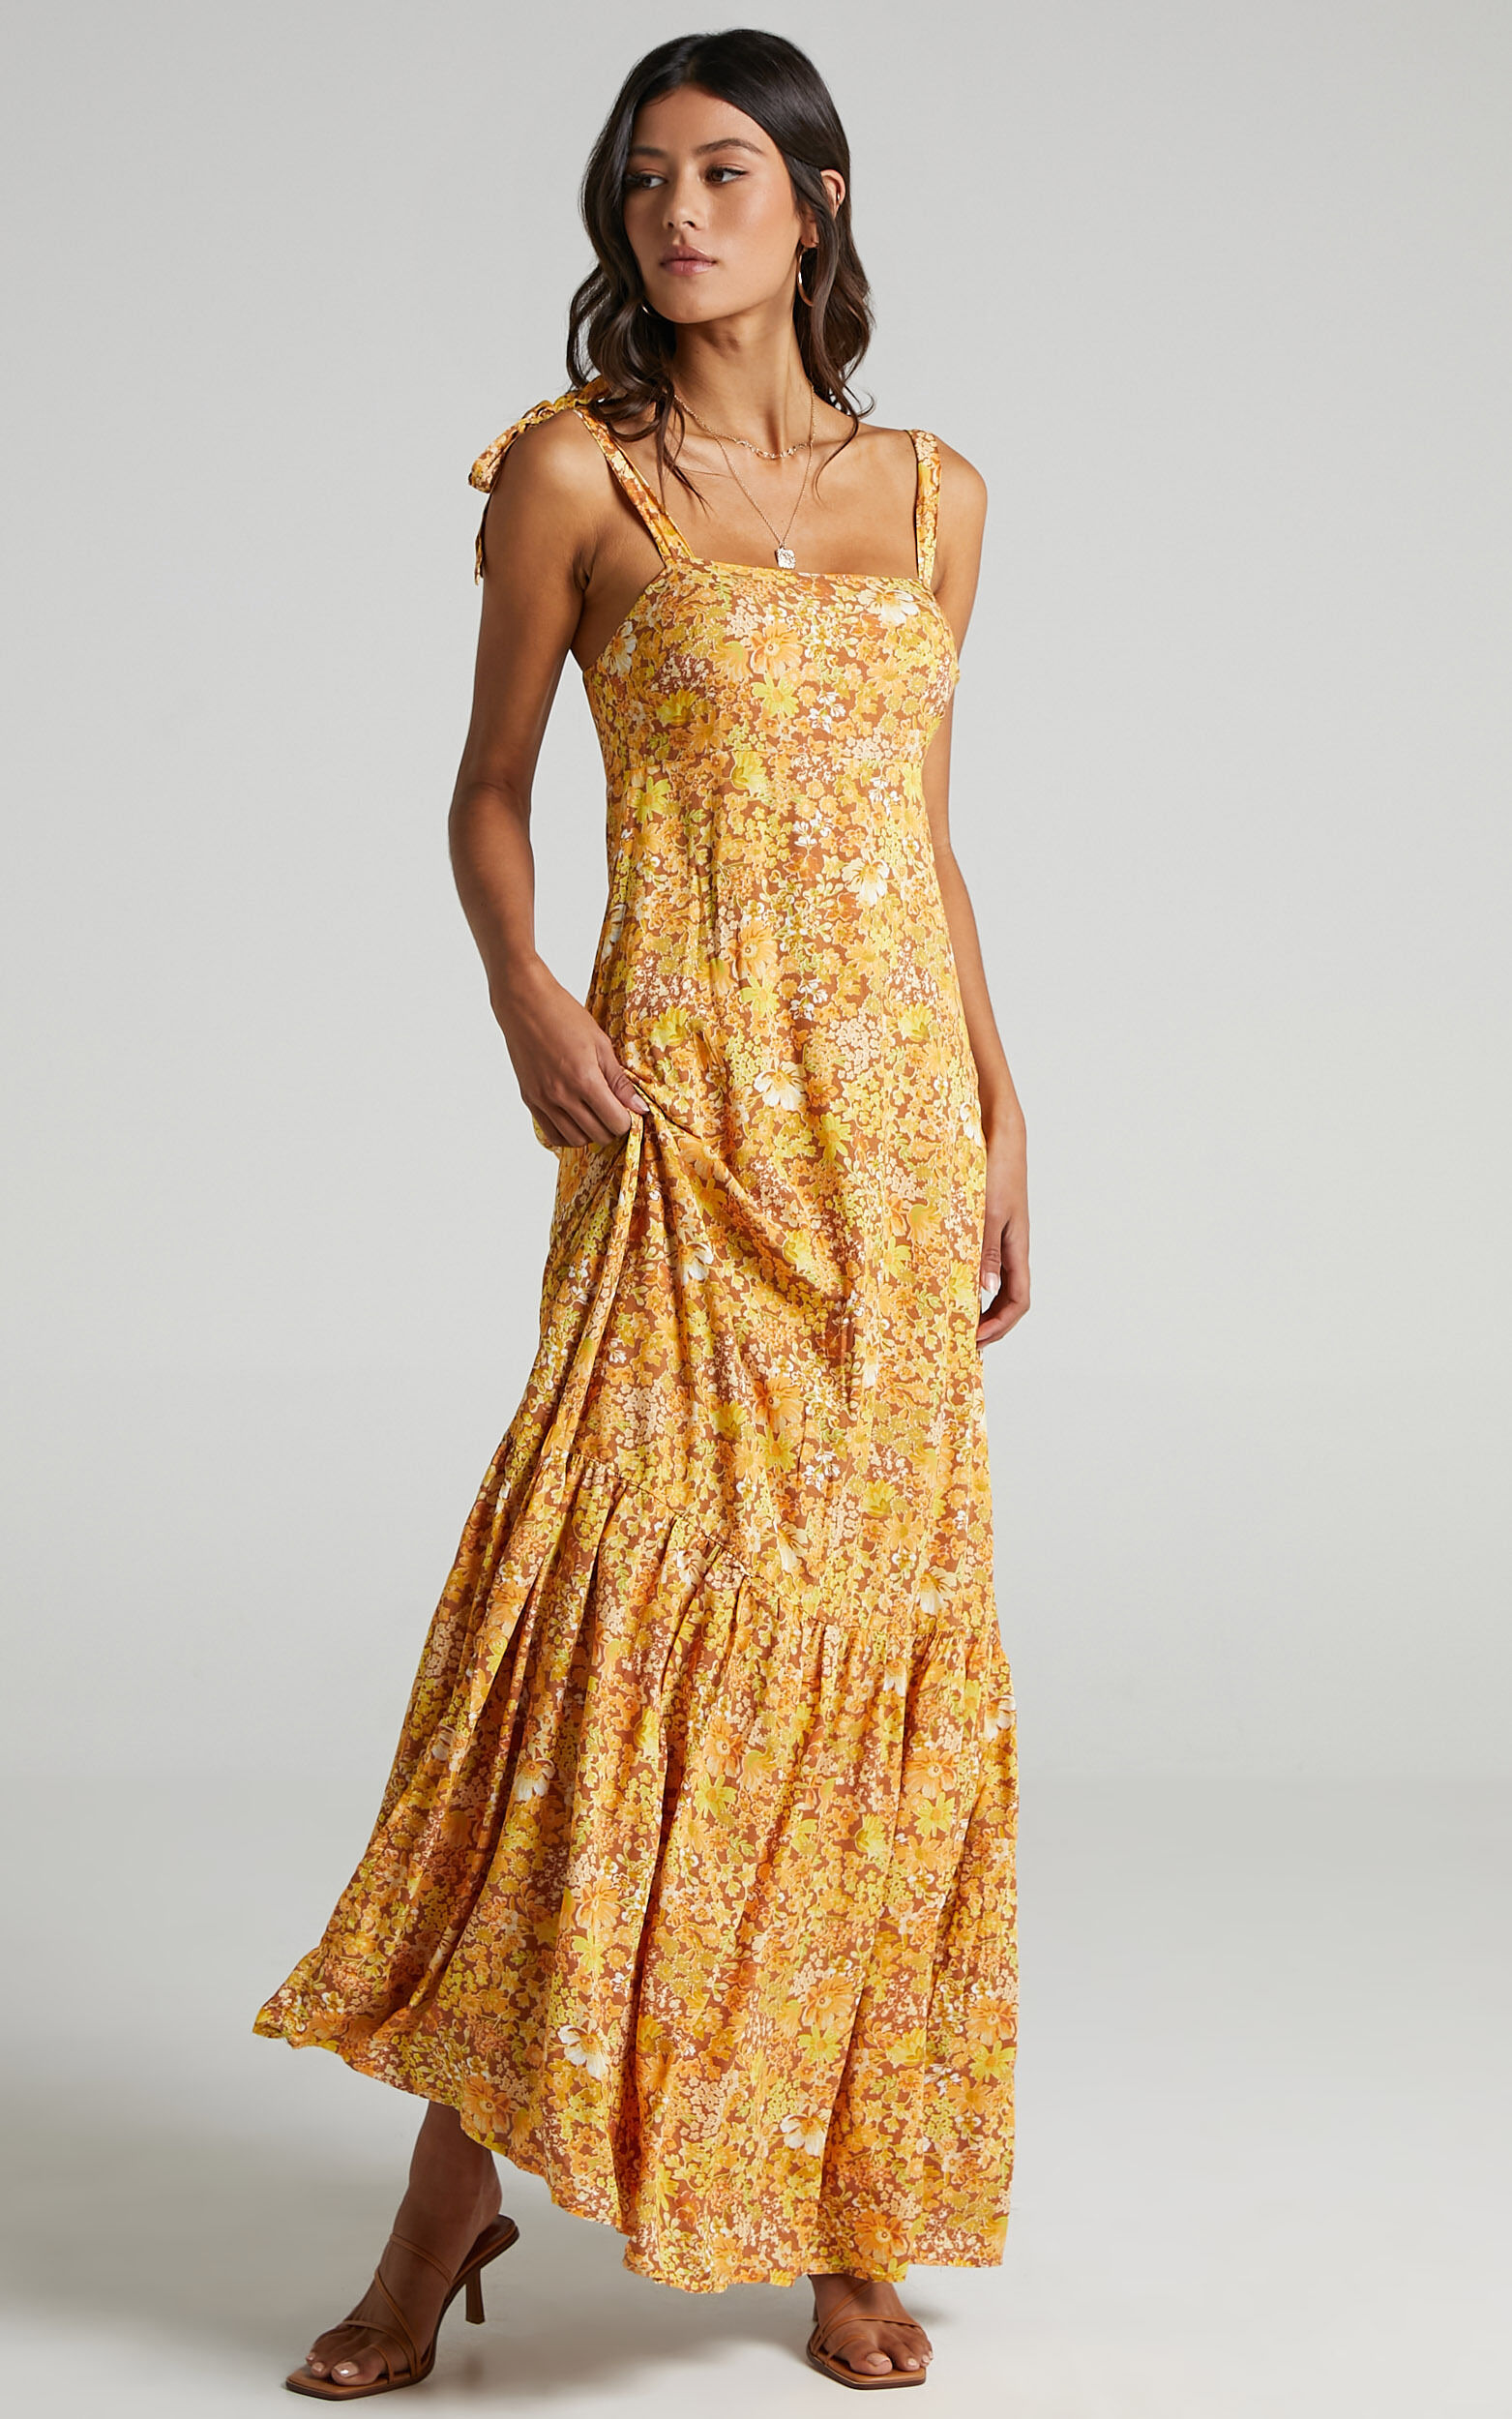 Honor Dress in Rustic Floral - 6 (XS), Mustard